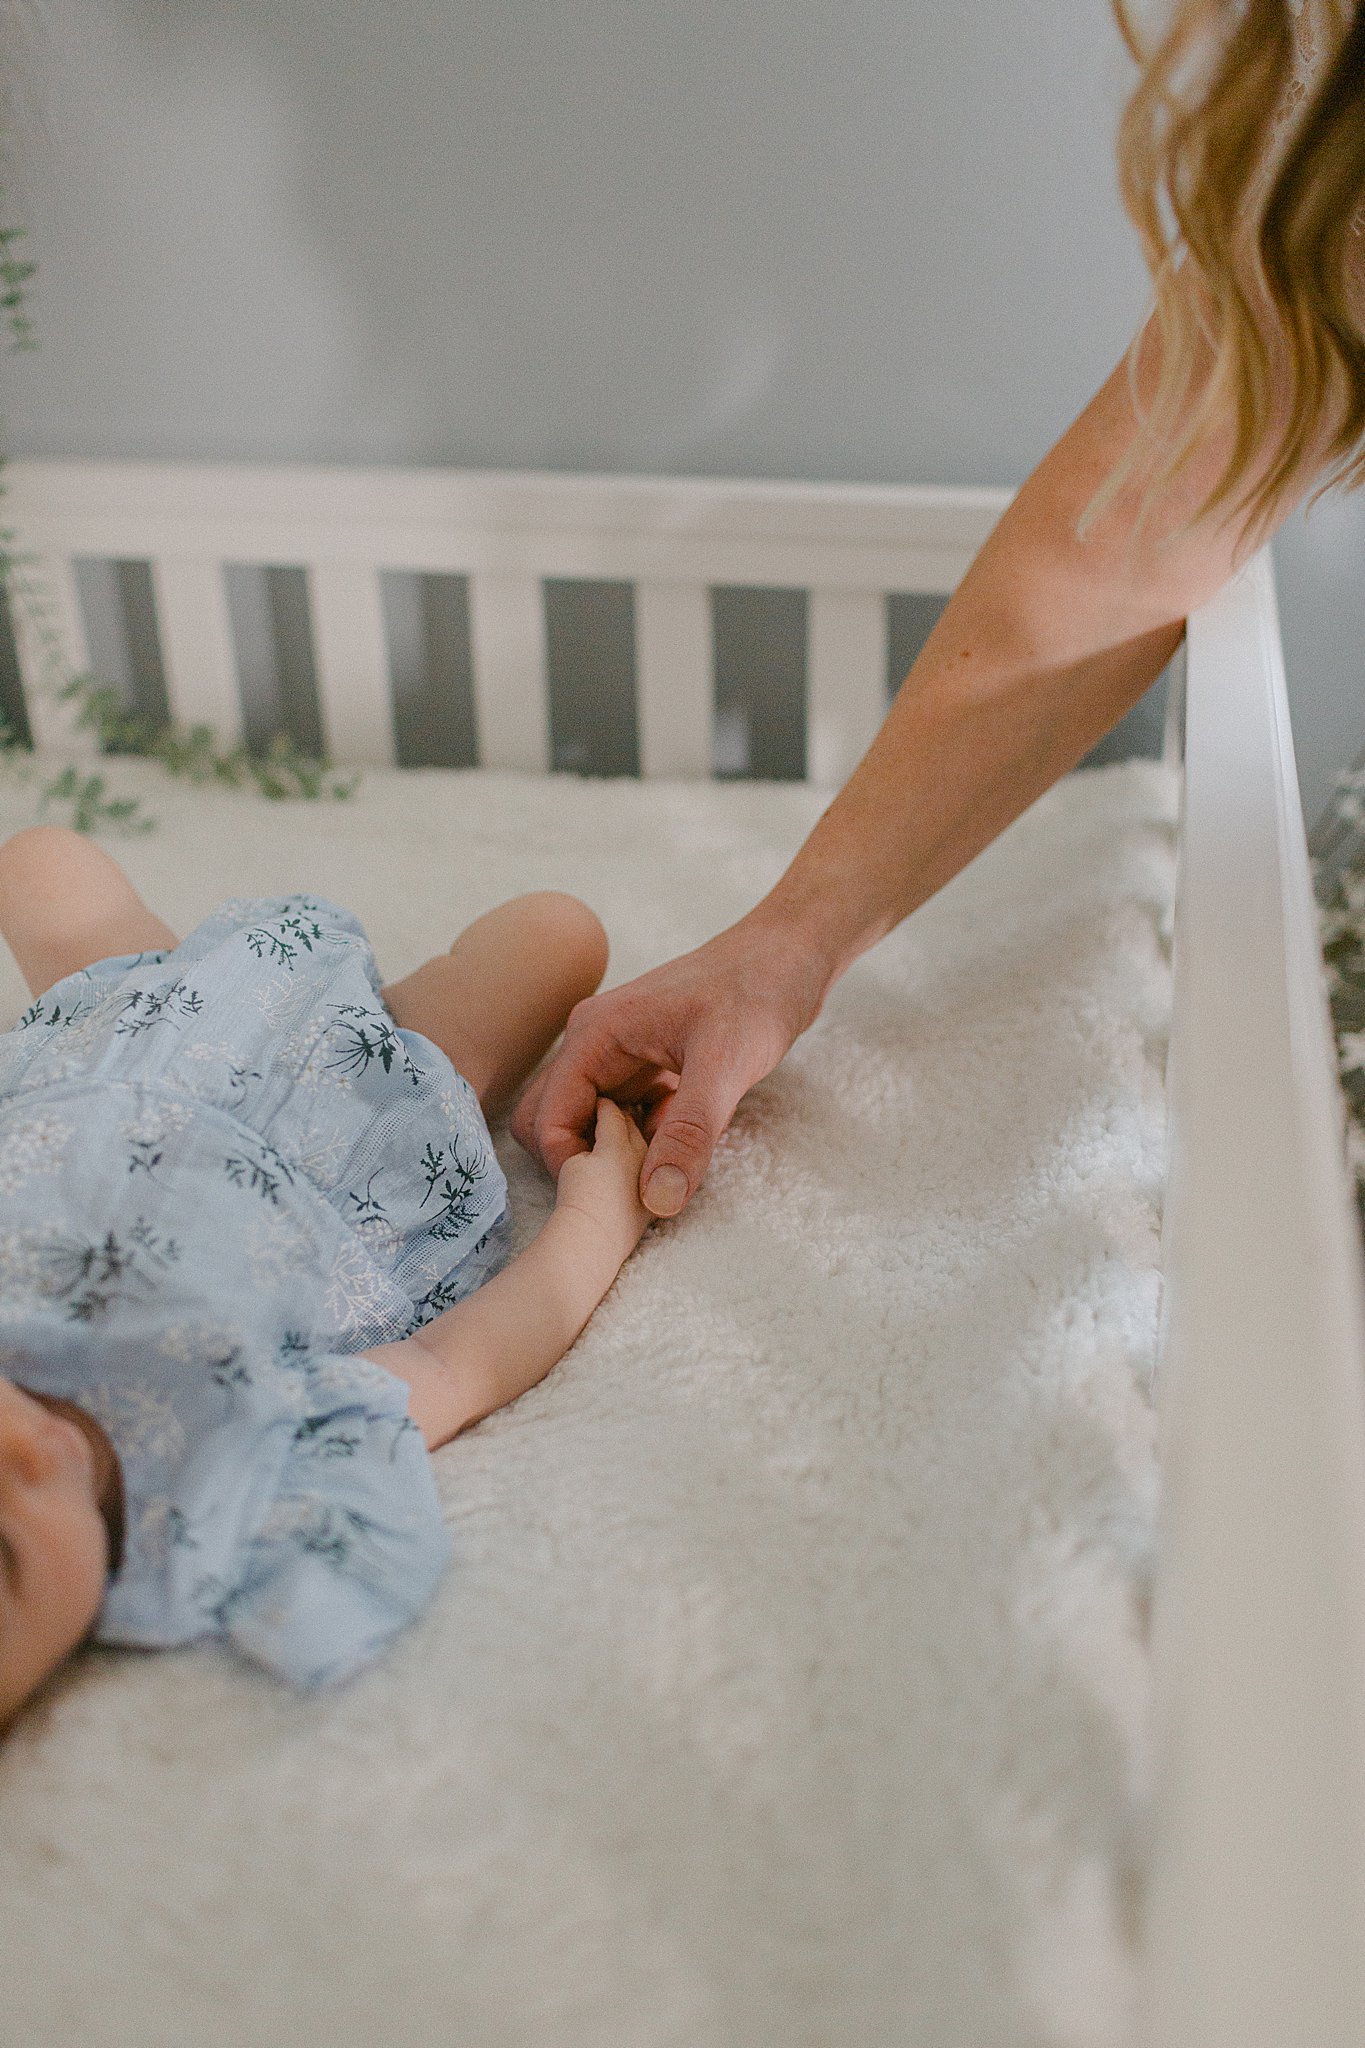 Mom & Baby holding hands at a Newborn Session in Green Bay